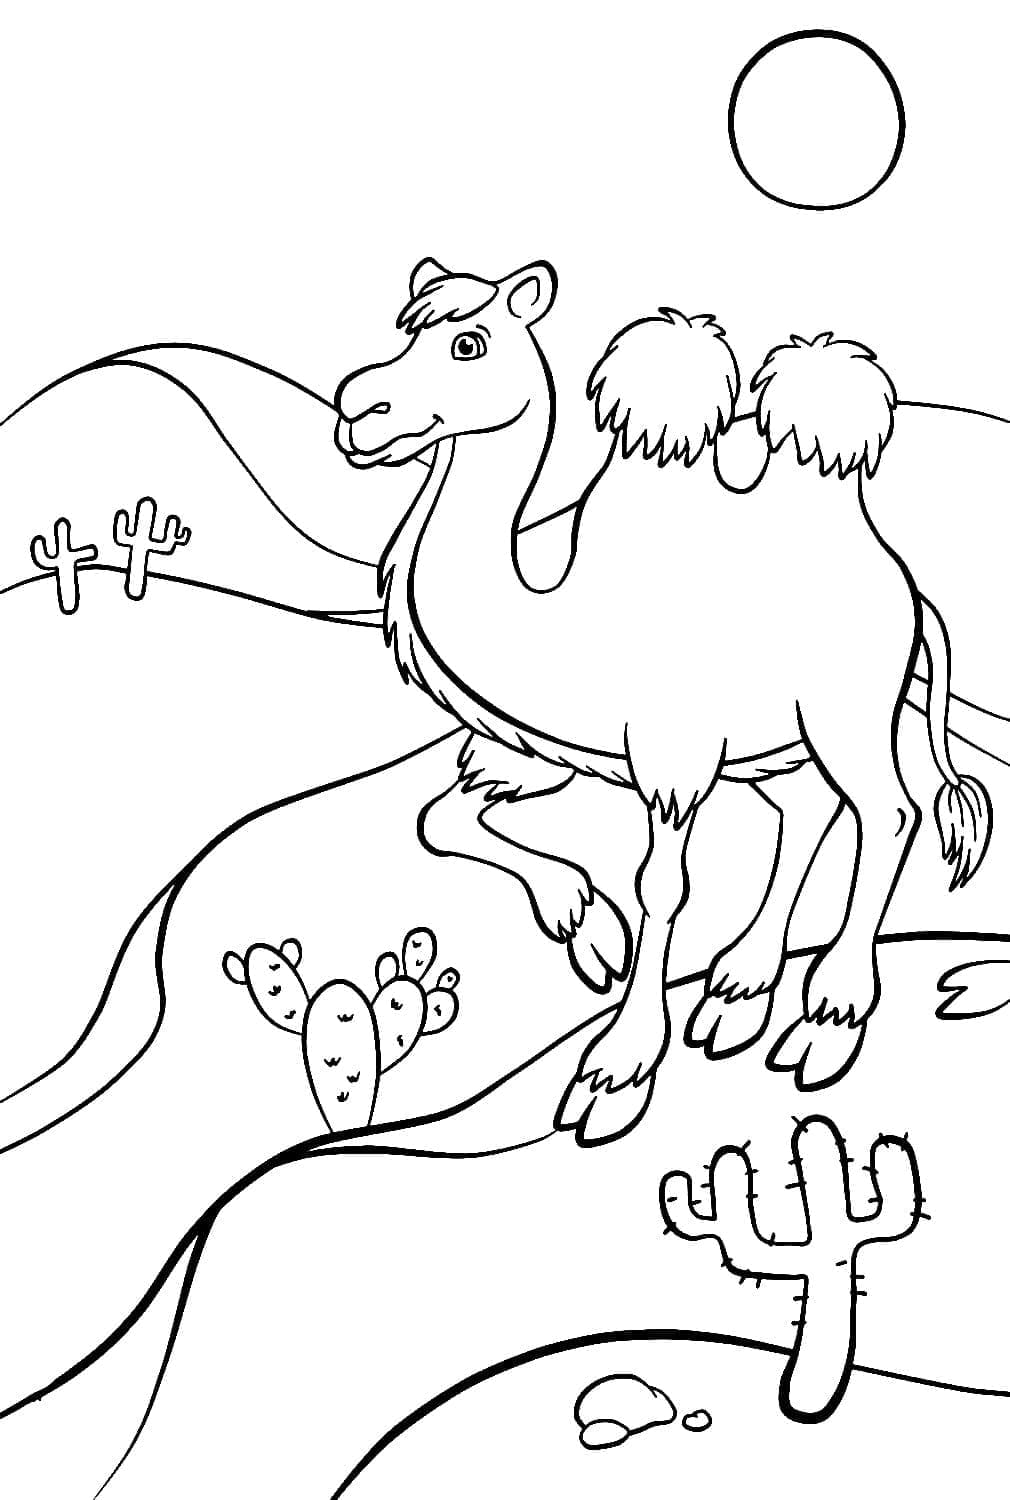 Chameau Amical coloring page